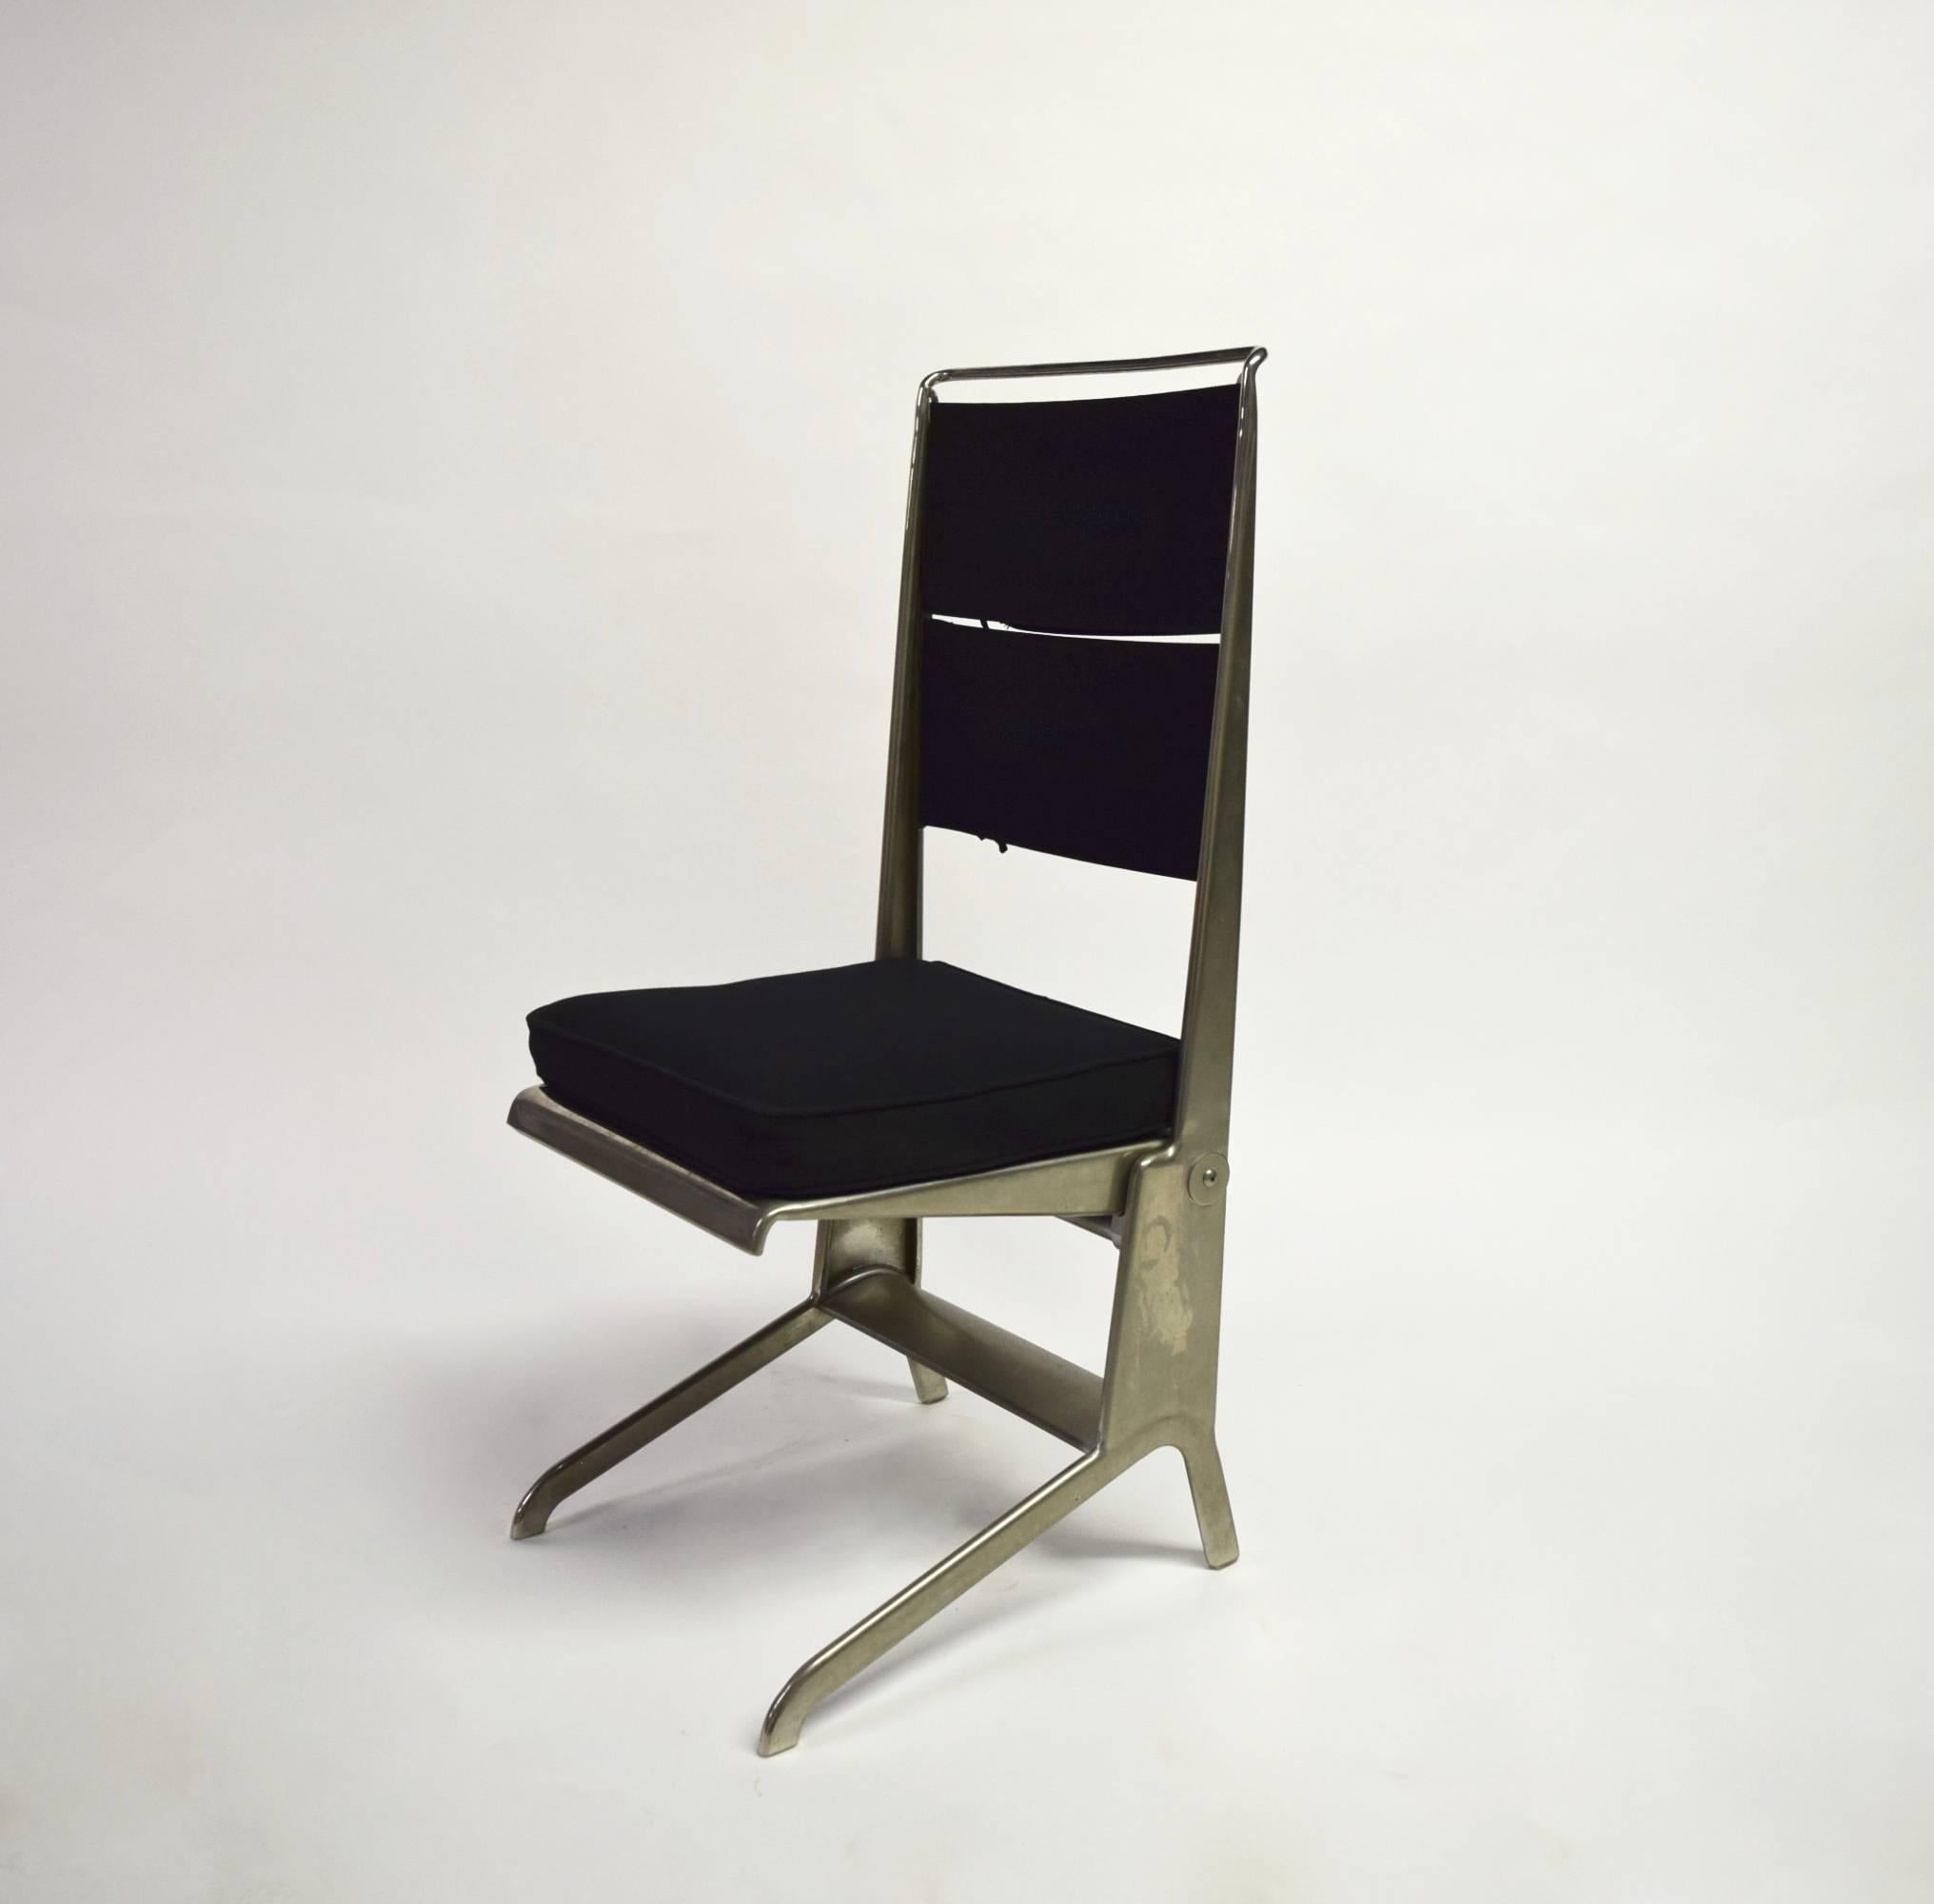 Jean Prouvé designed chairs have a nickel plated steel frame utilizing his 